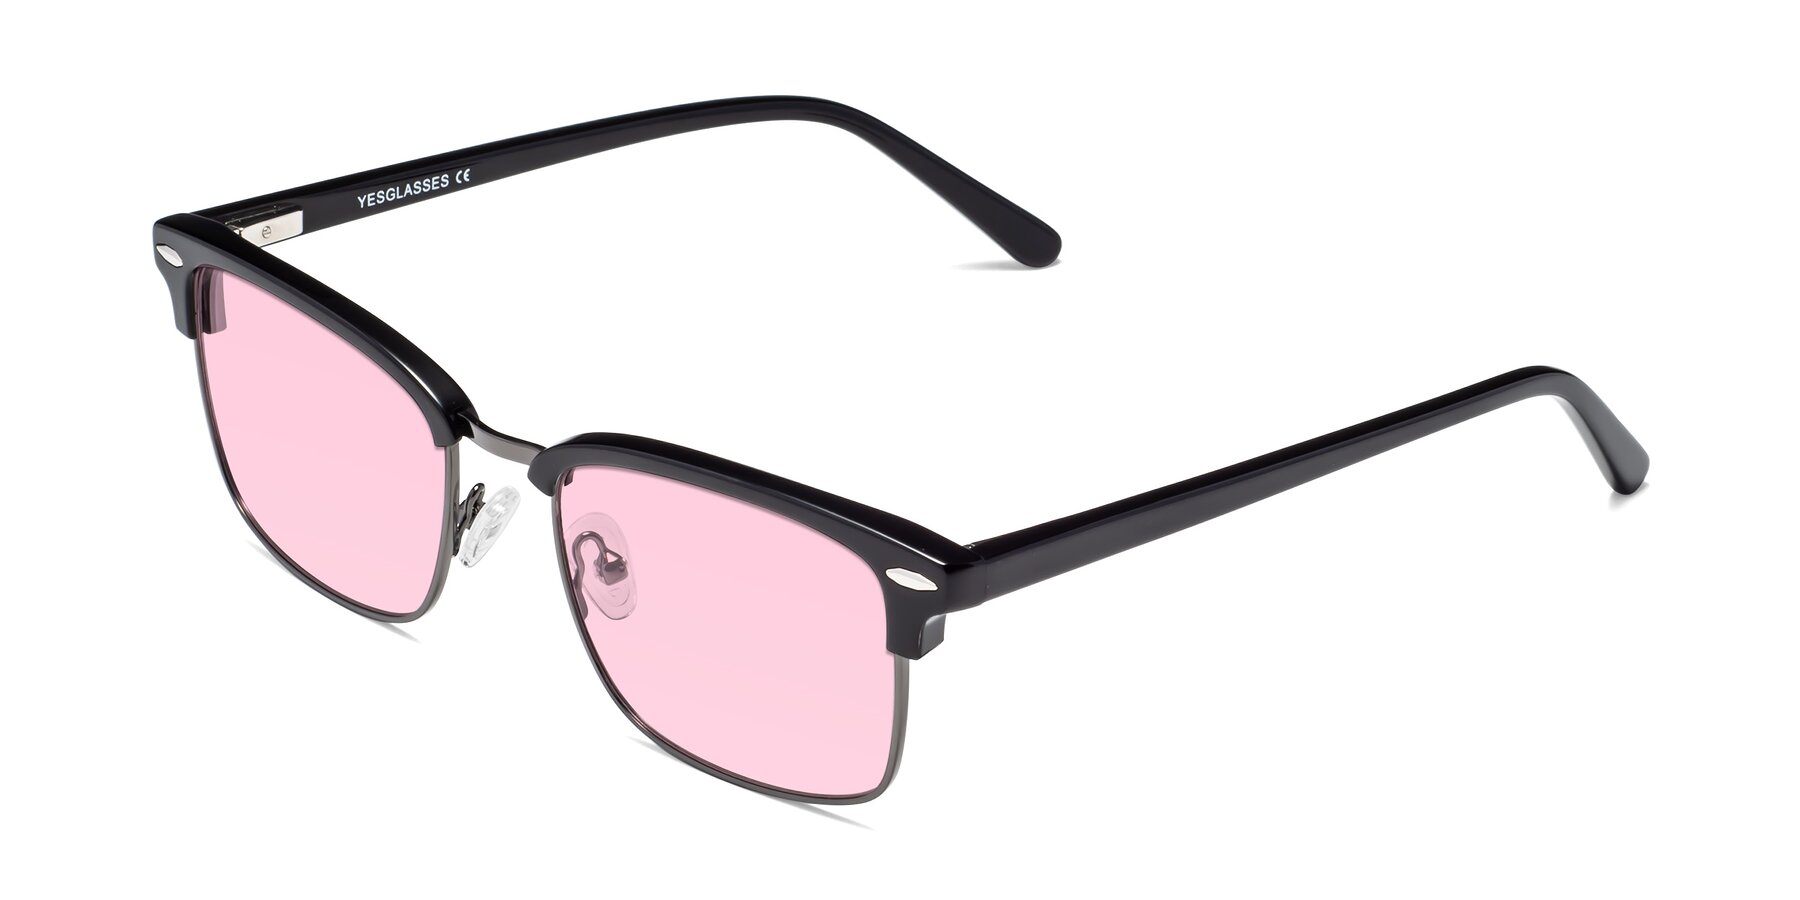 Angle of 17464 in Black-Gunmetal with Light Pink Tinted Lenses